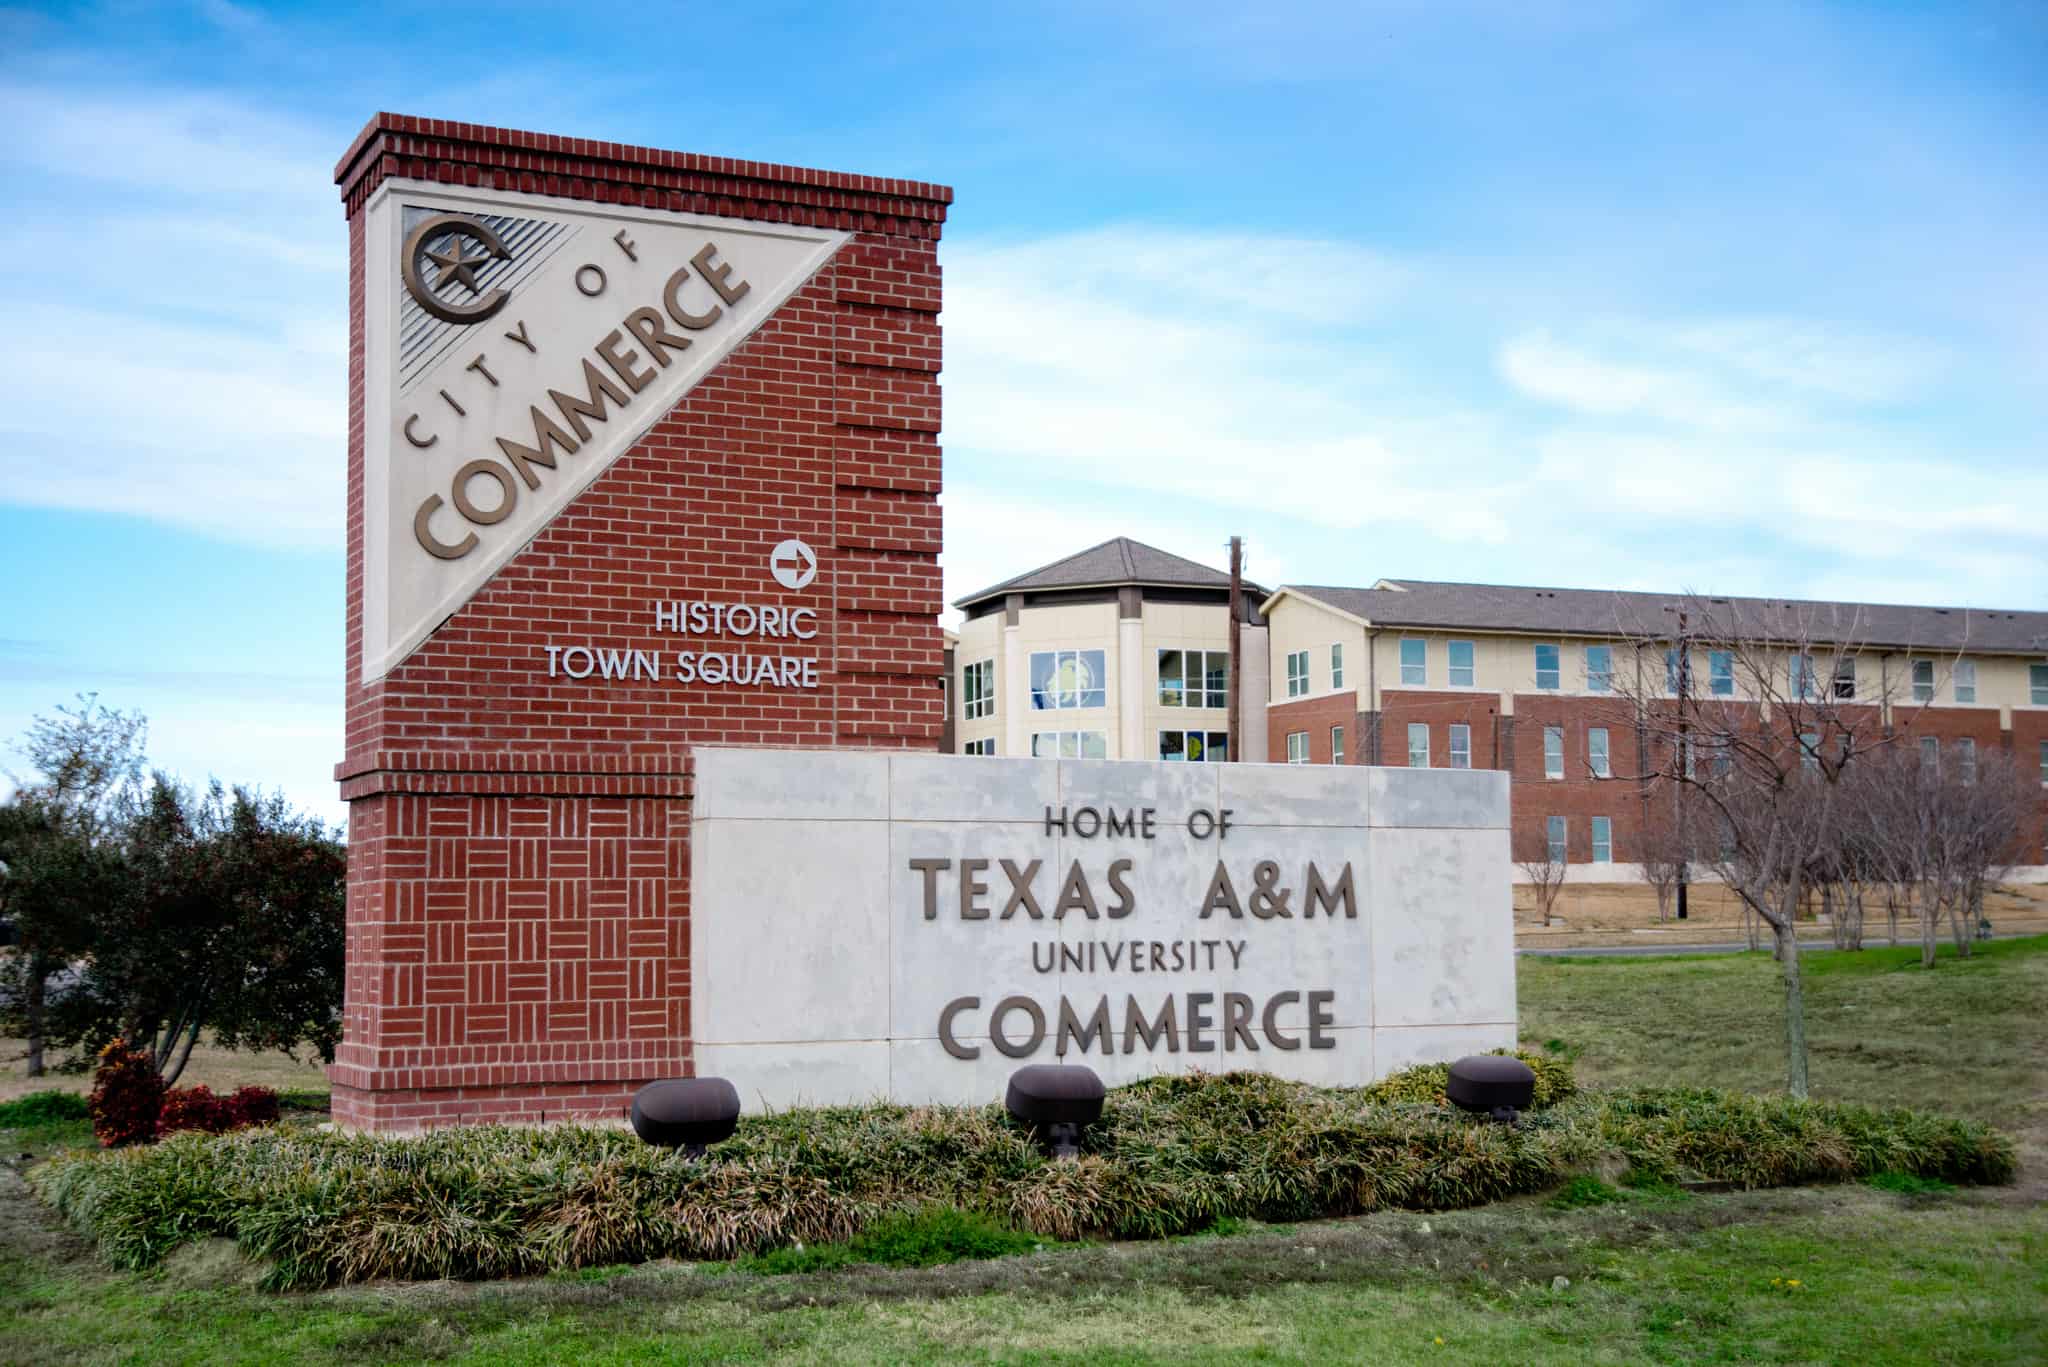 Named a 'FastestGrowing College' Texas A&M University